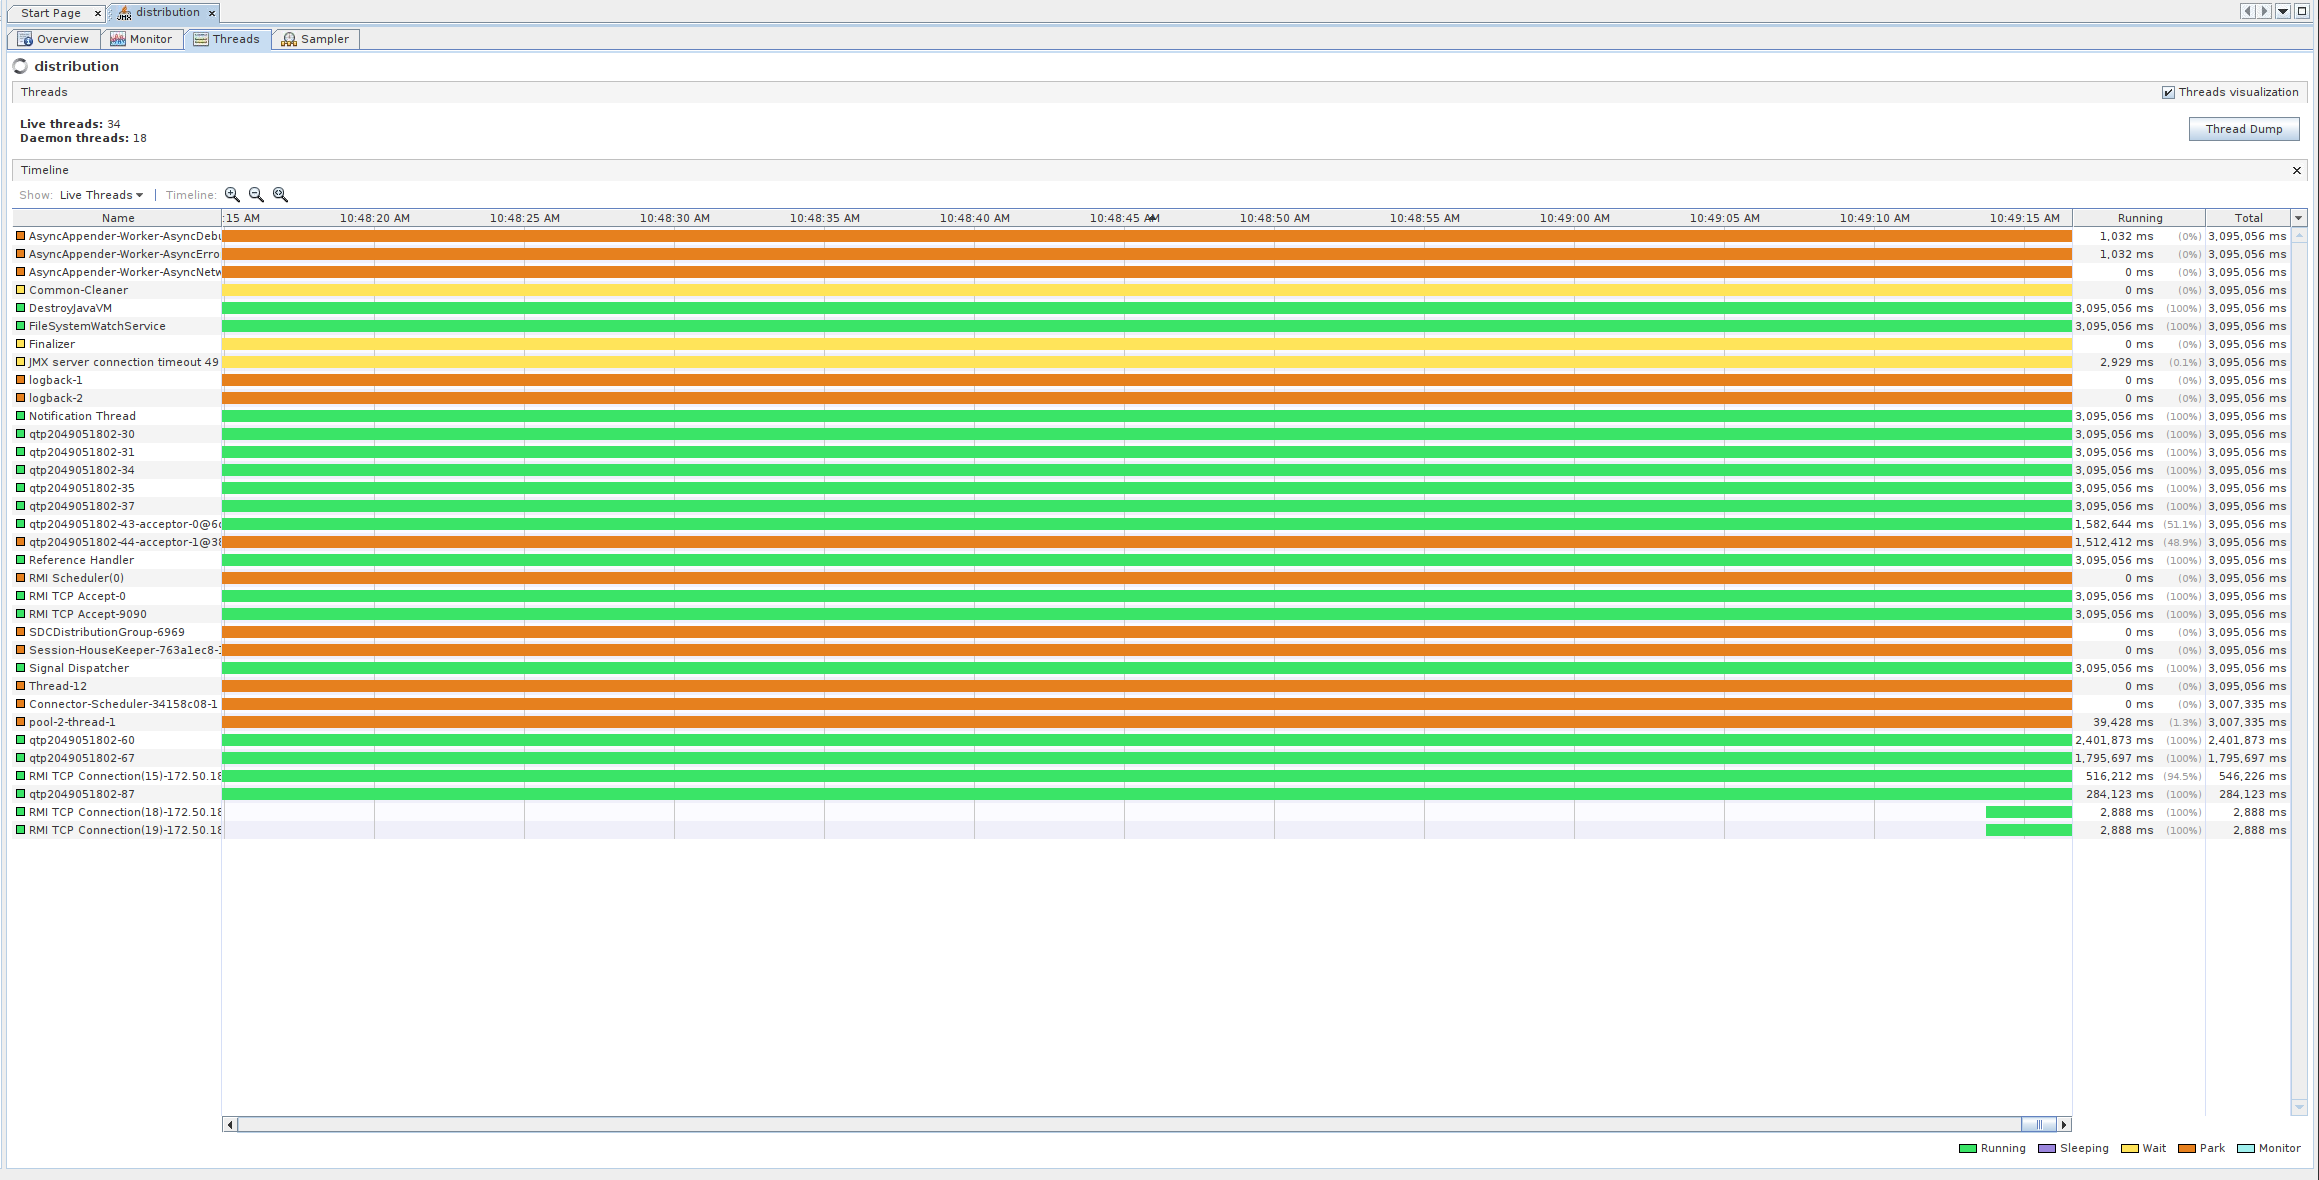 docs/development/devtools/testing/s3p/distribution-s3p-results/stability-threads.png